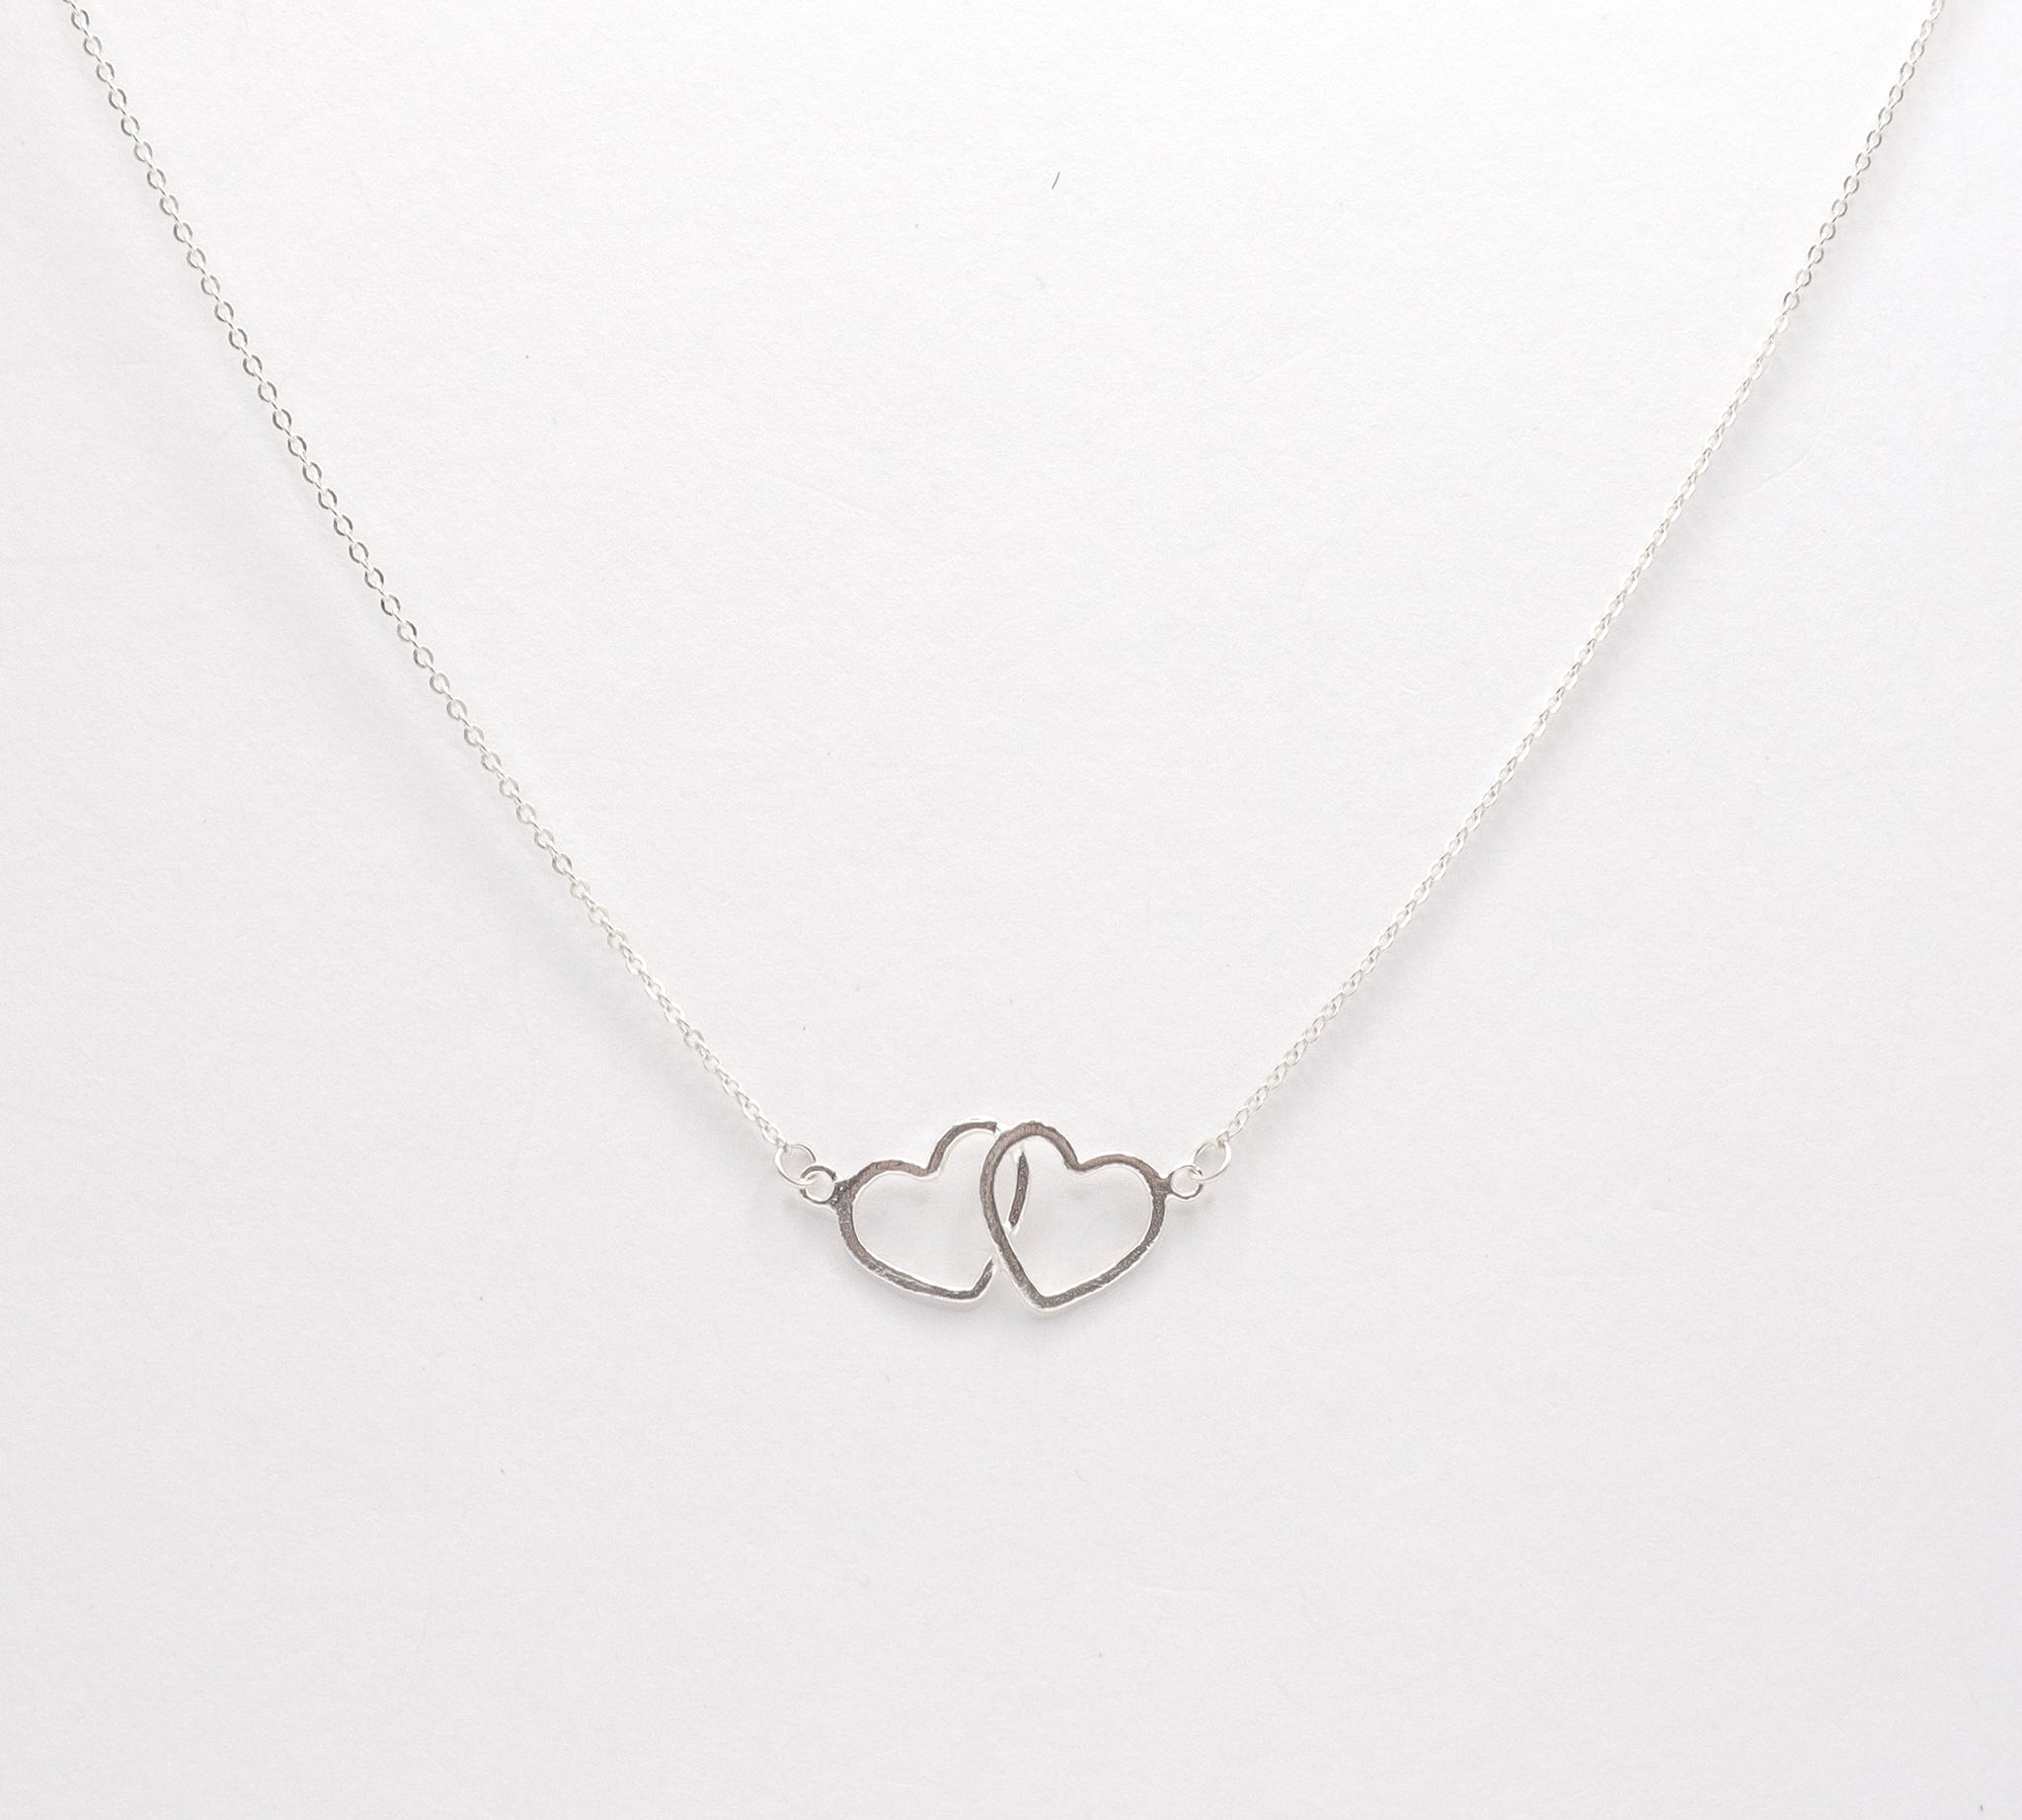 Silver Friendship Necklace, featured image